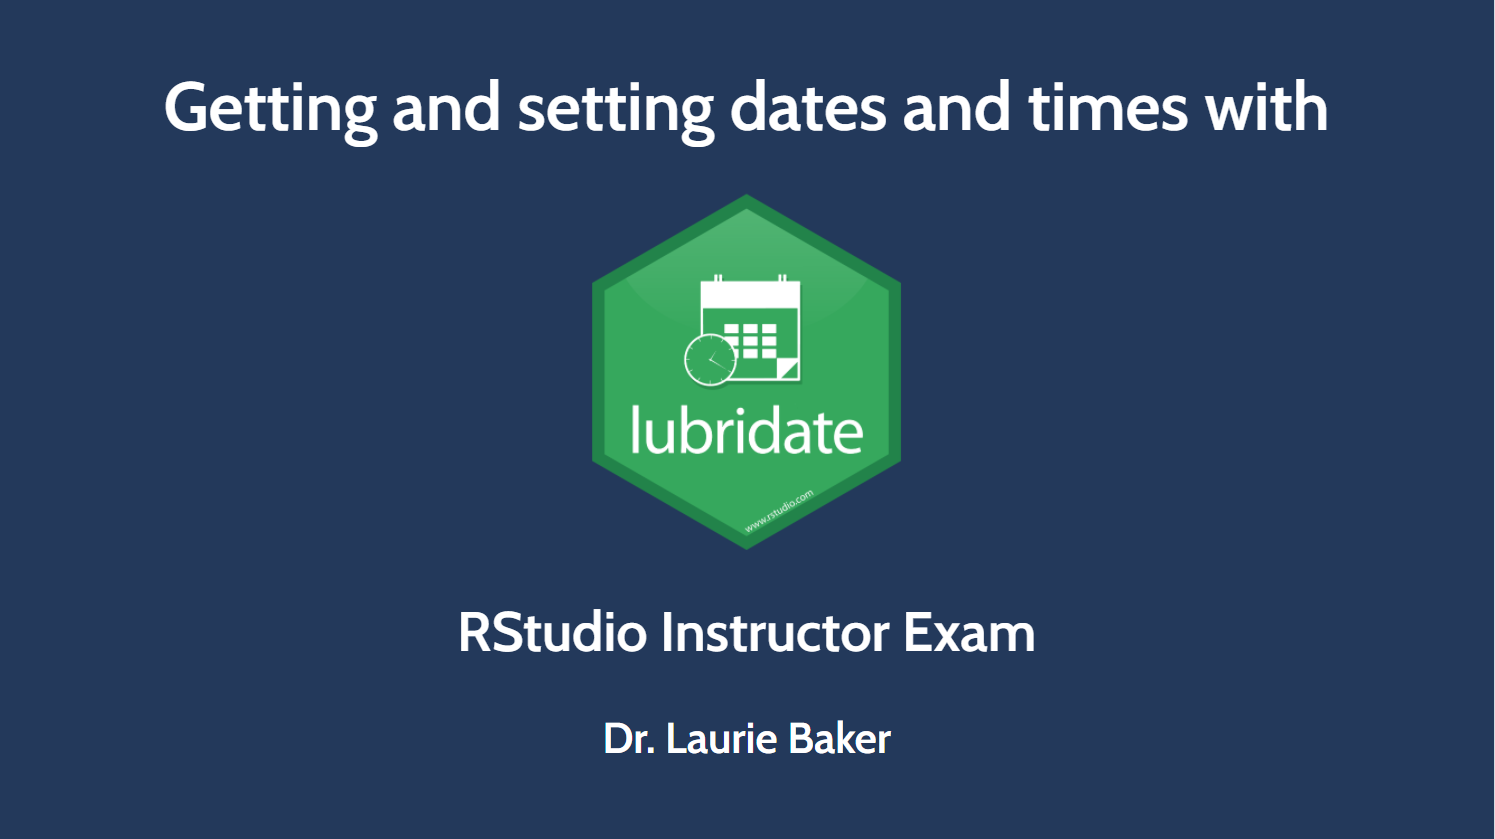 Opening course slide for getting and setting times using lubridate featuring the lubridate hex sticker